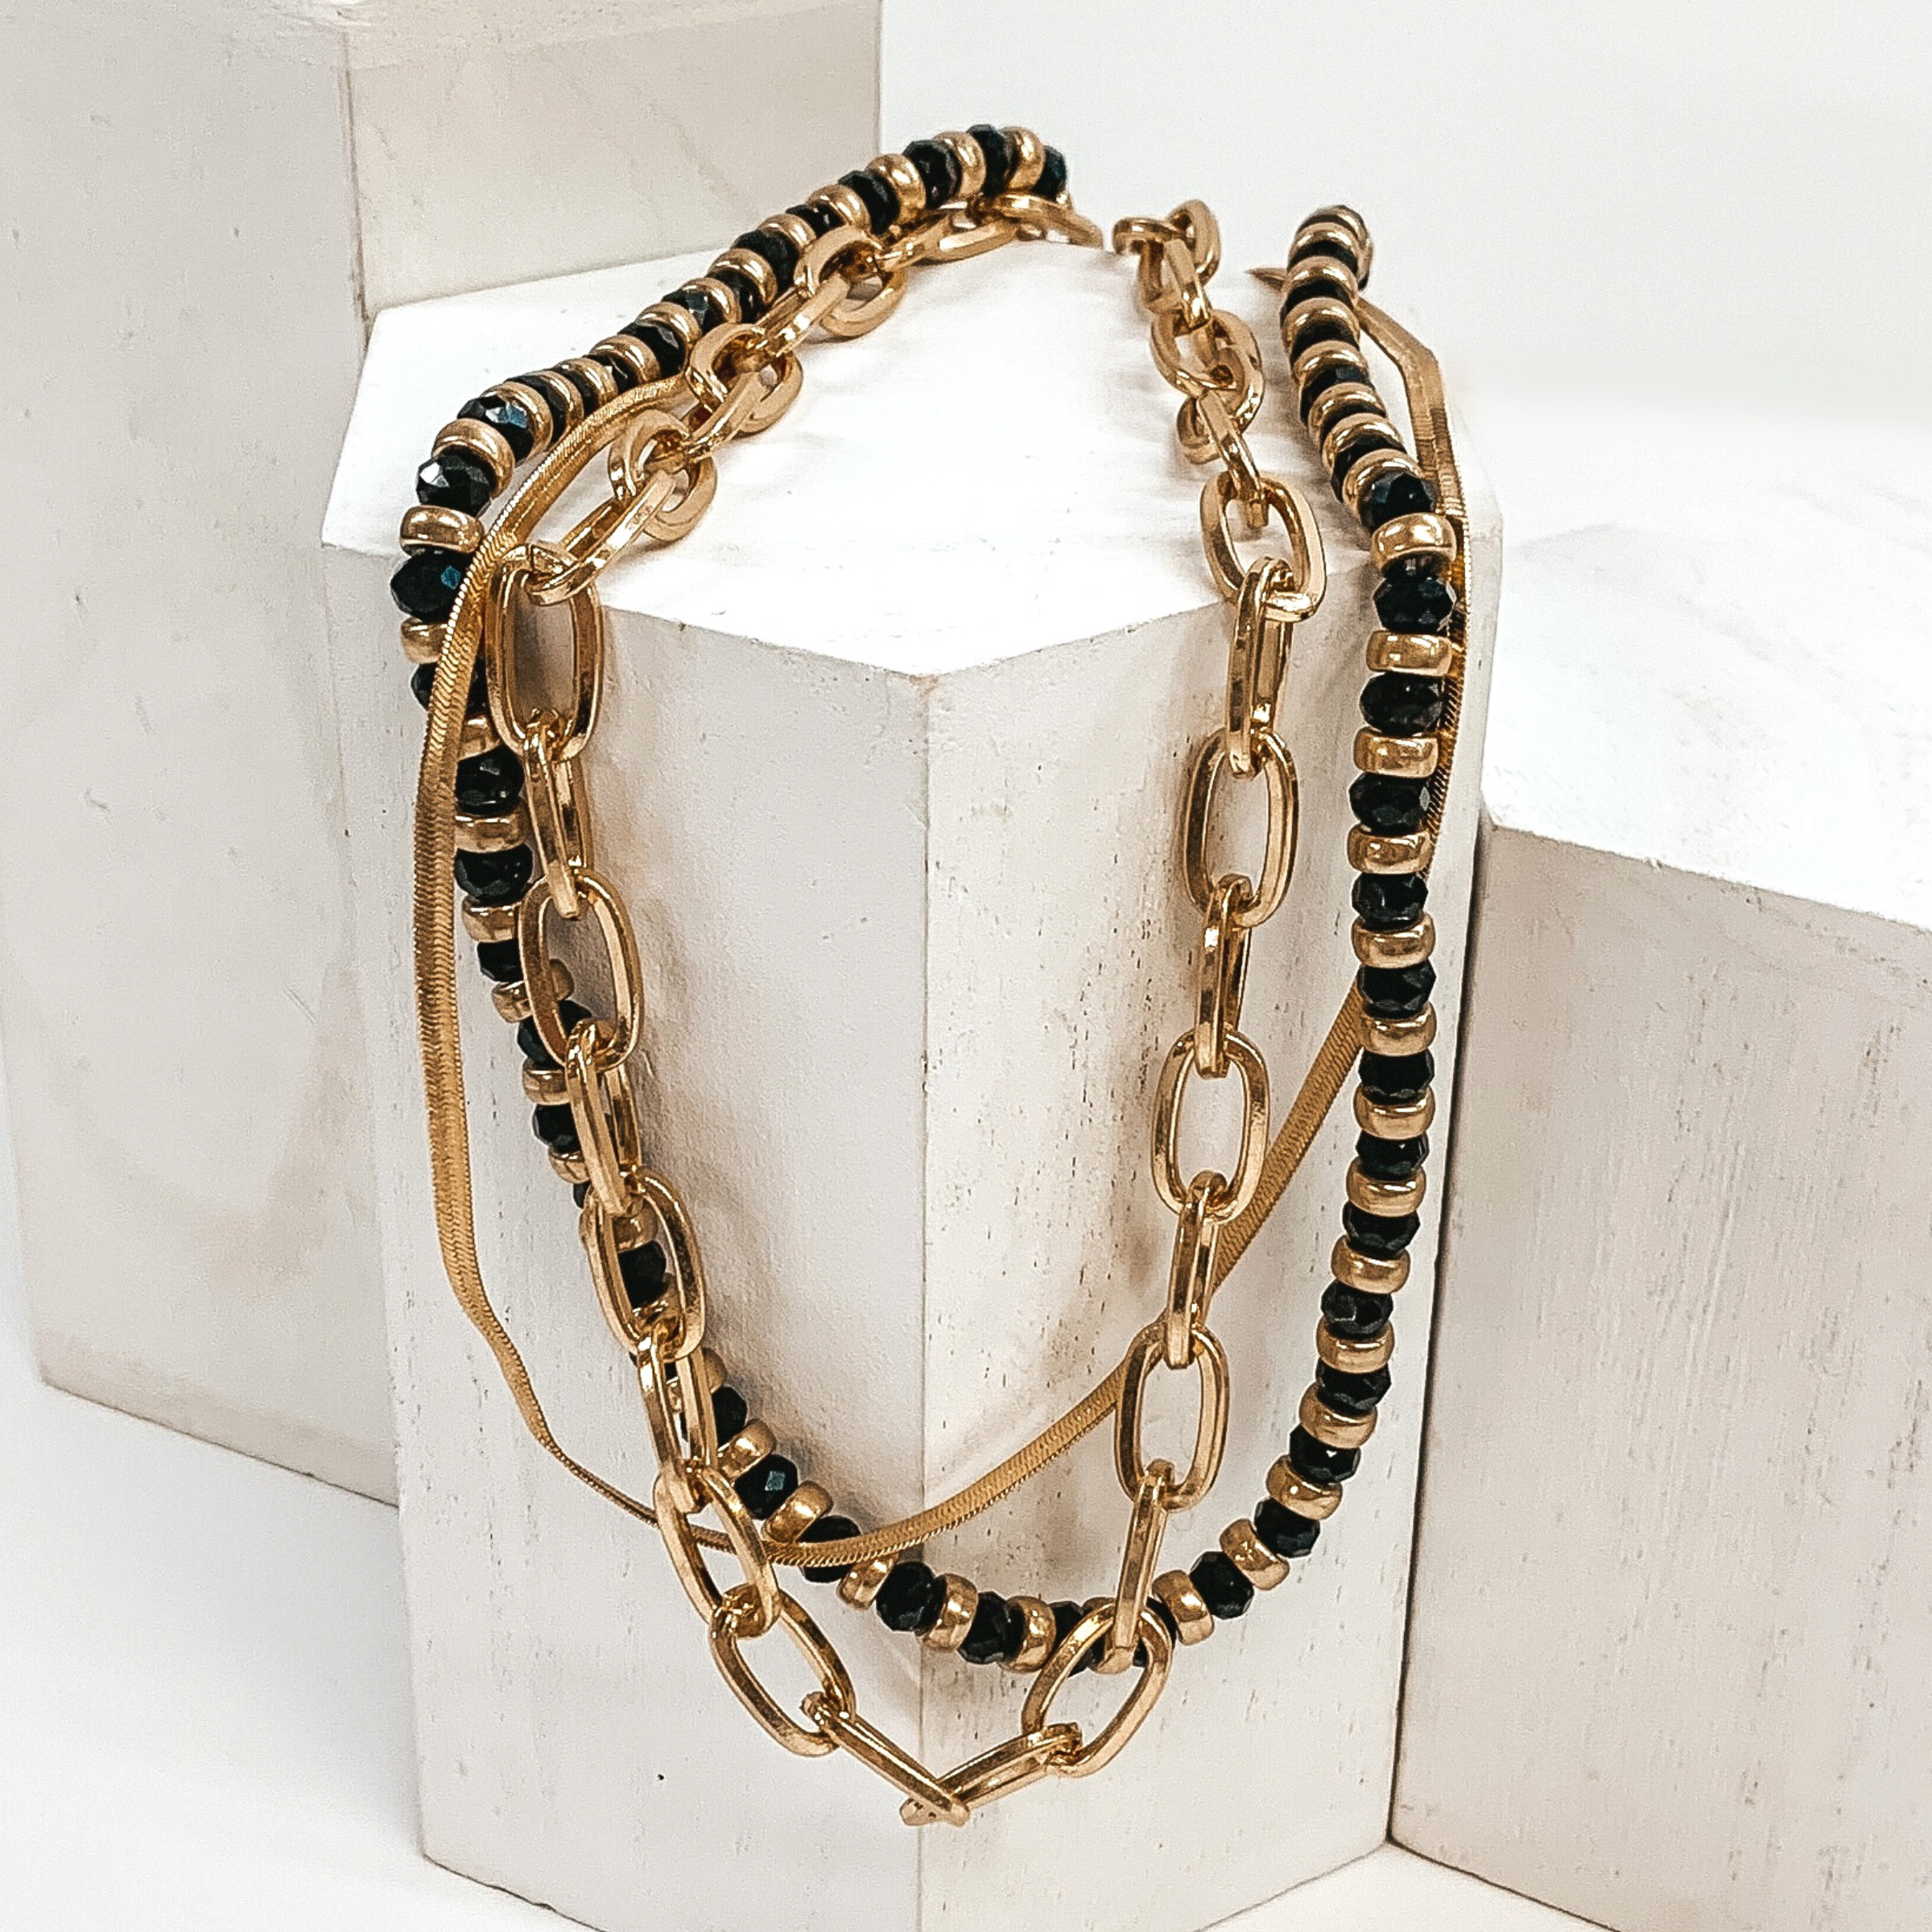 This is a multi layered necklace. One strand is a thick, gold paperclip chain, one is  gold snake chain, and the last strand is a mix of black and gold beads. This necklace is pictured laying on a white block on a white background. 